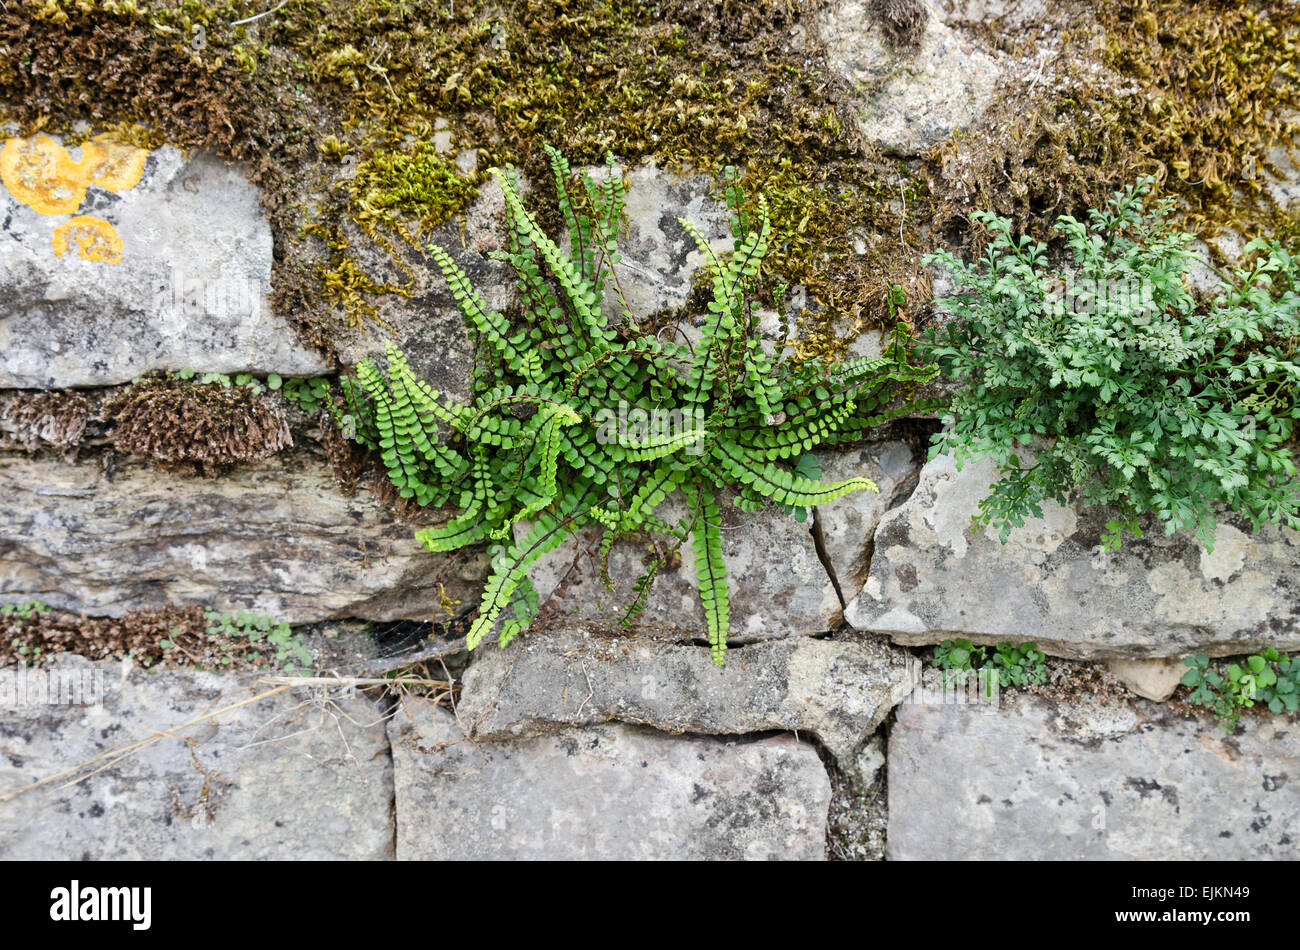 Maidenhair fern (Asplenium trichomanes) growing in the joints of an old stone wall in Chagny, Burgundy, France. Stock Photo